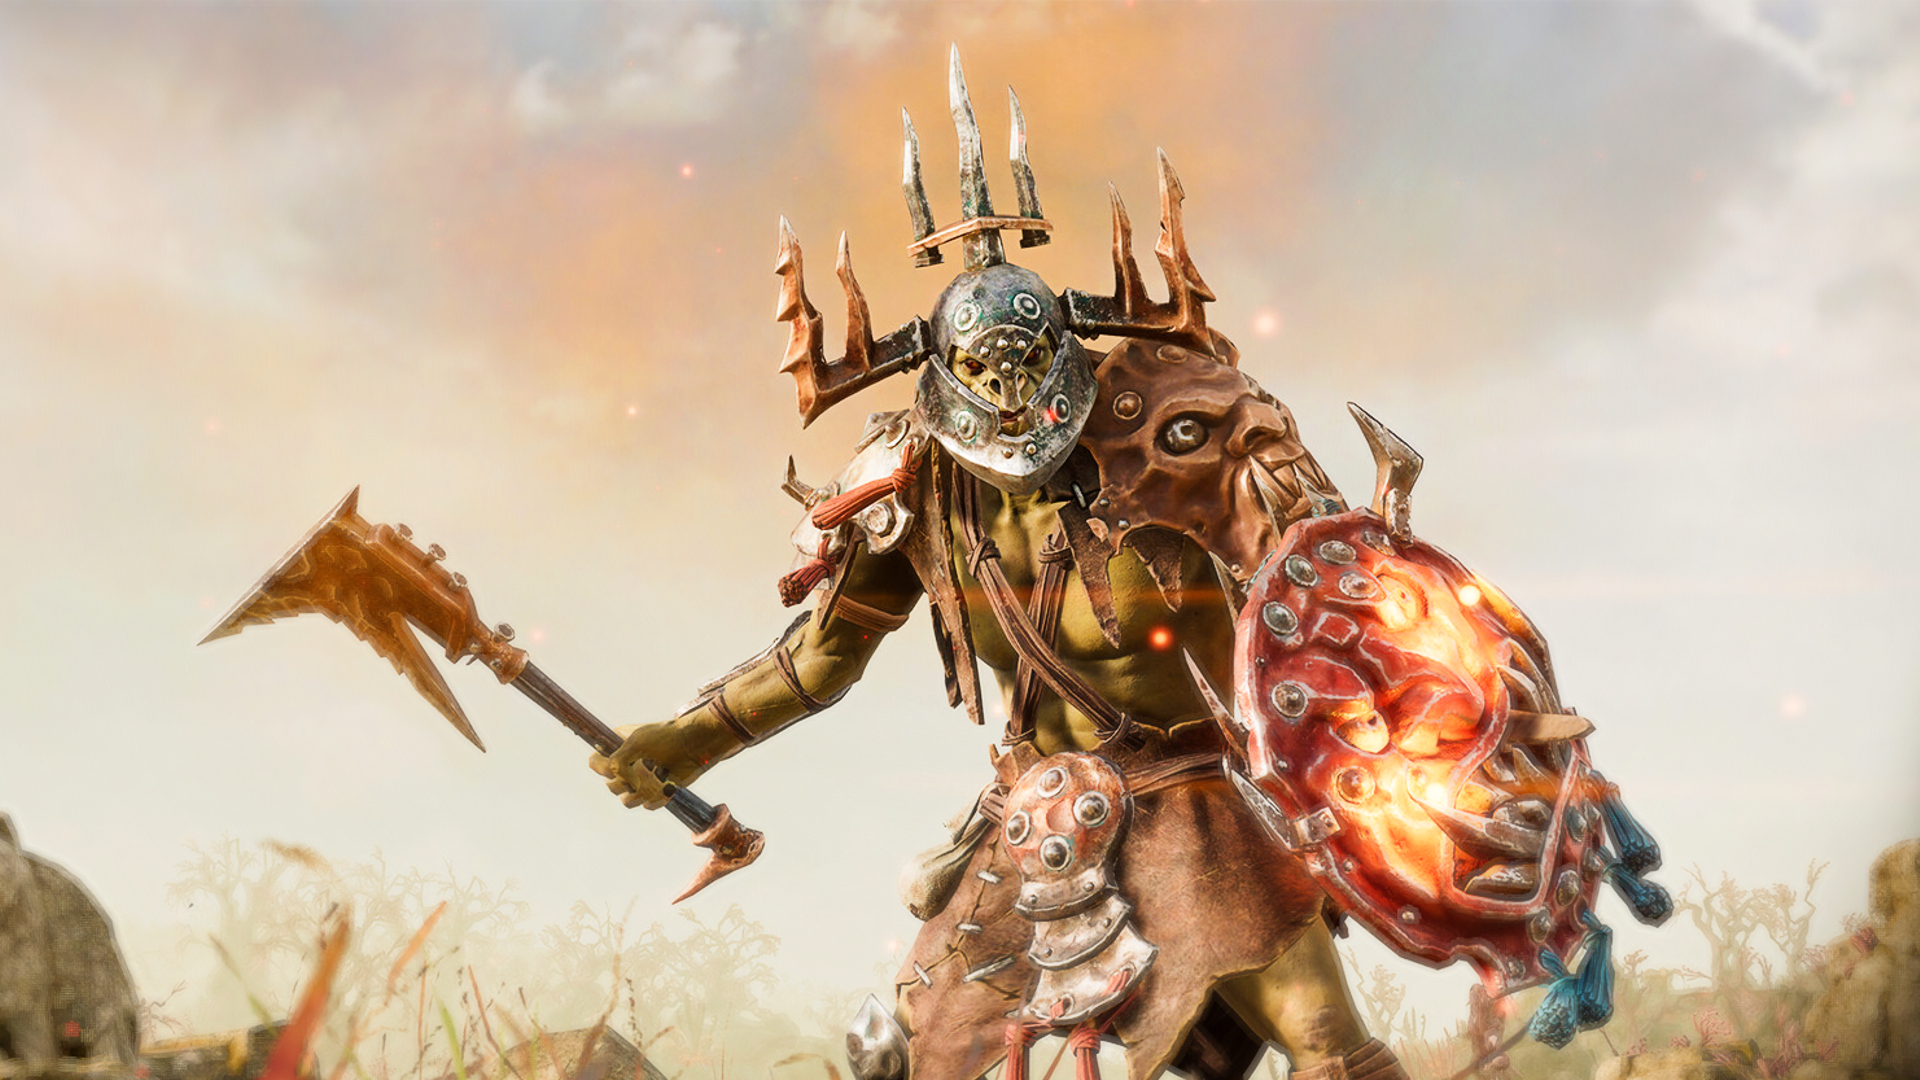 Warhammer fans get ready, nine new games are in development